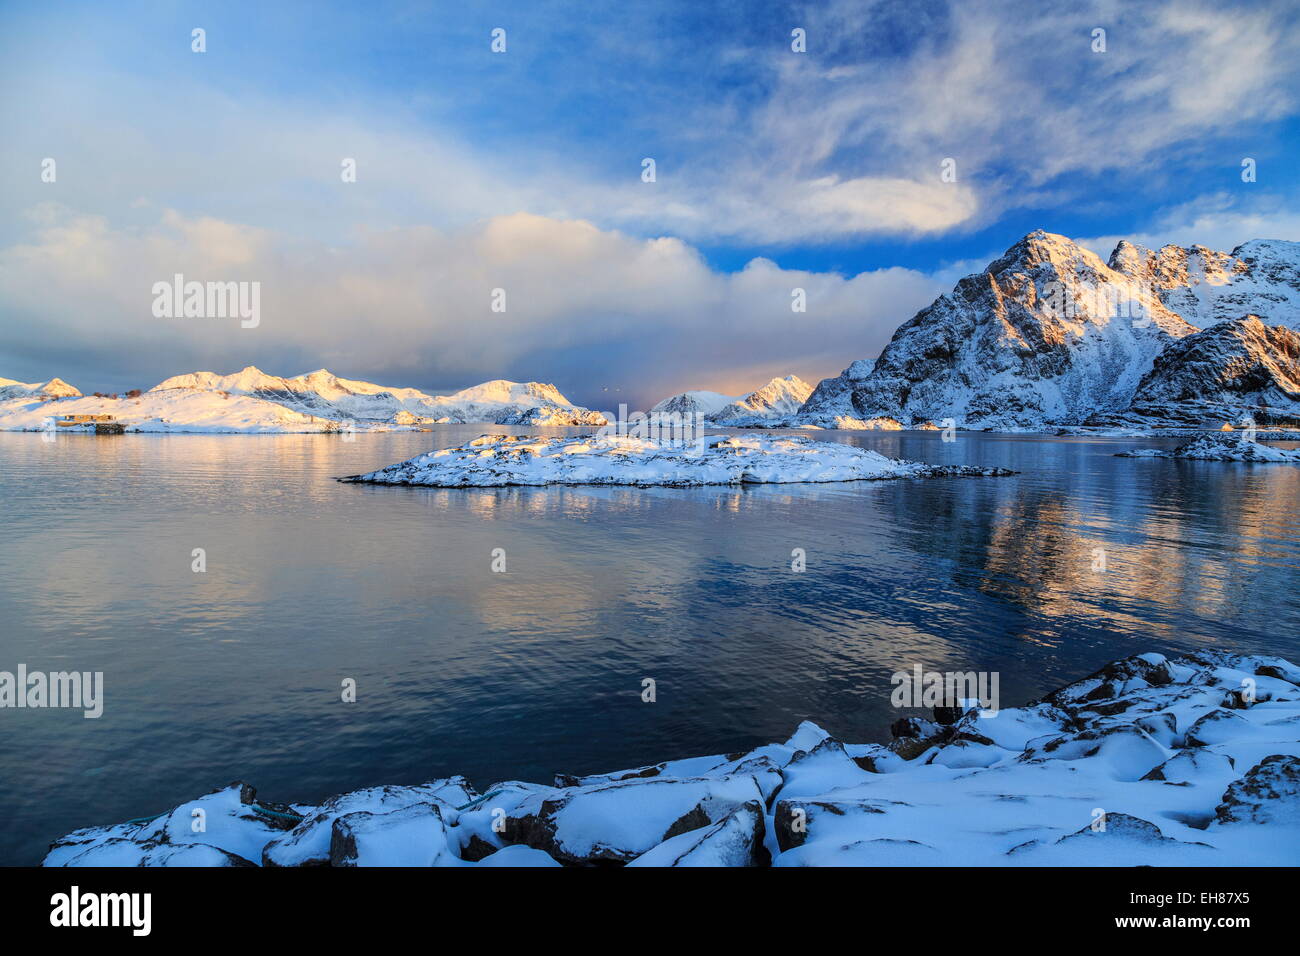 The feeble light of the sunset on a fjord near Henningsvaer covered in snow, Lofoten Islands, Arctic, Norway Stock Photo